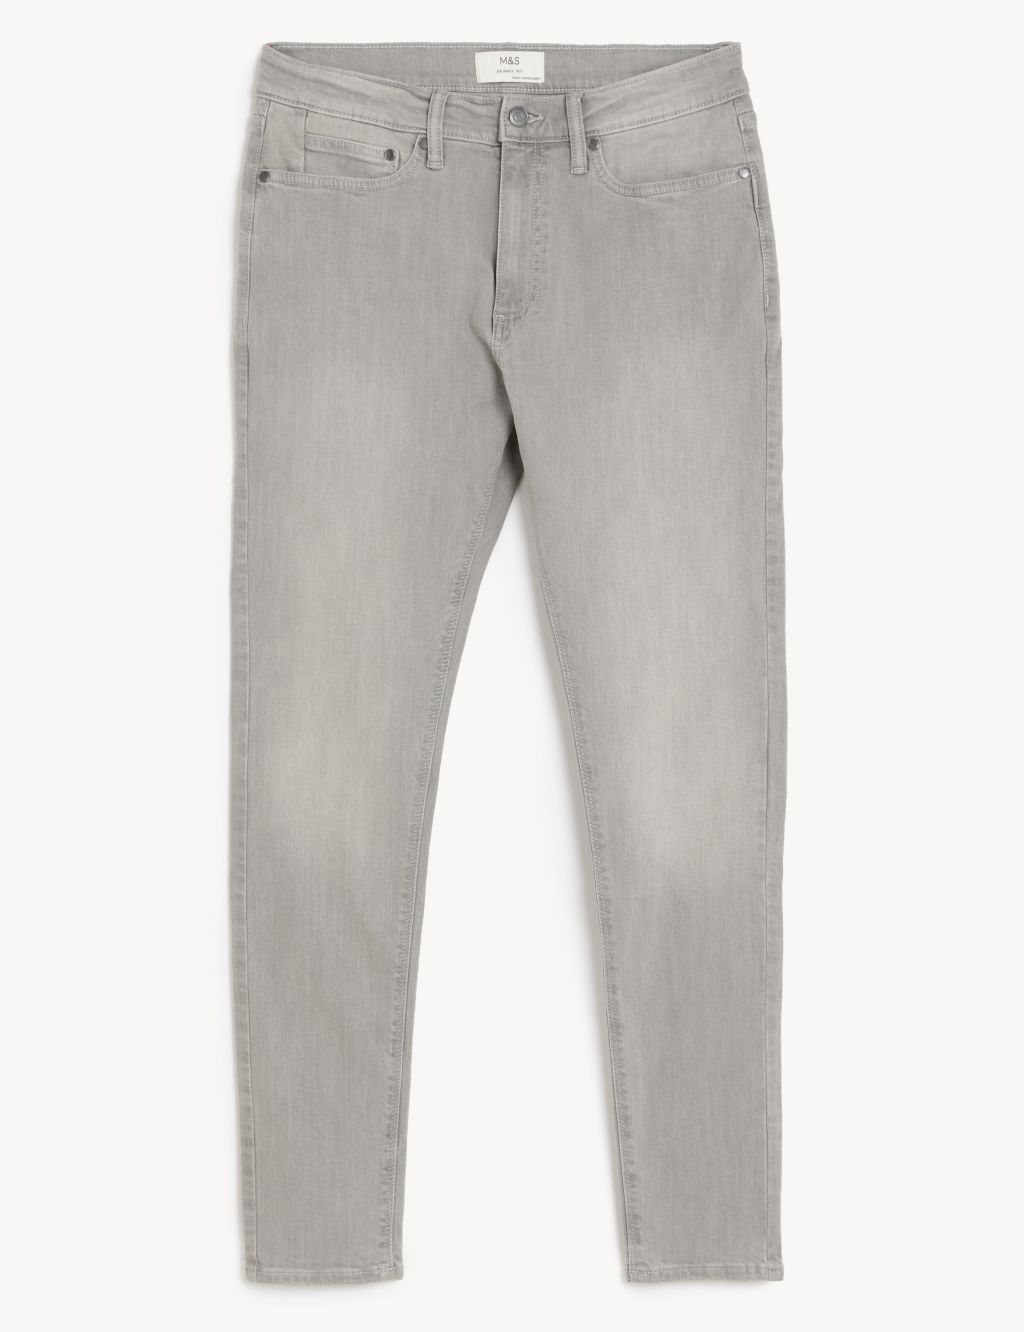 Skinny Fit Stretch Jeans image 2